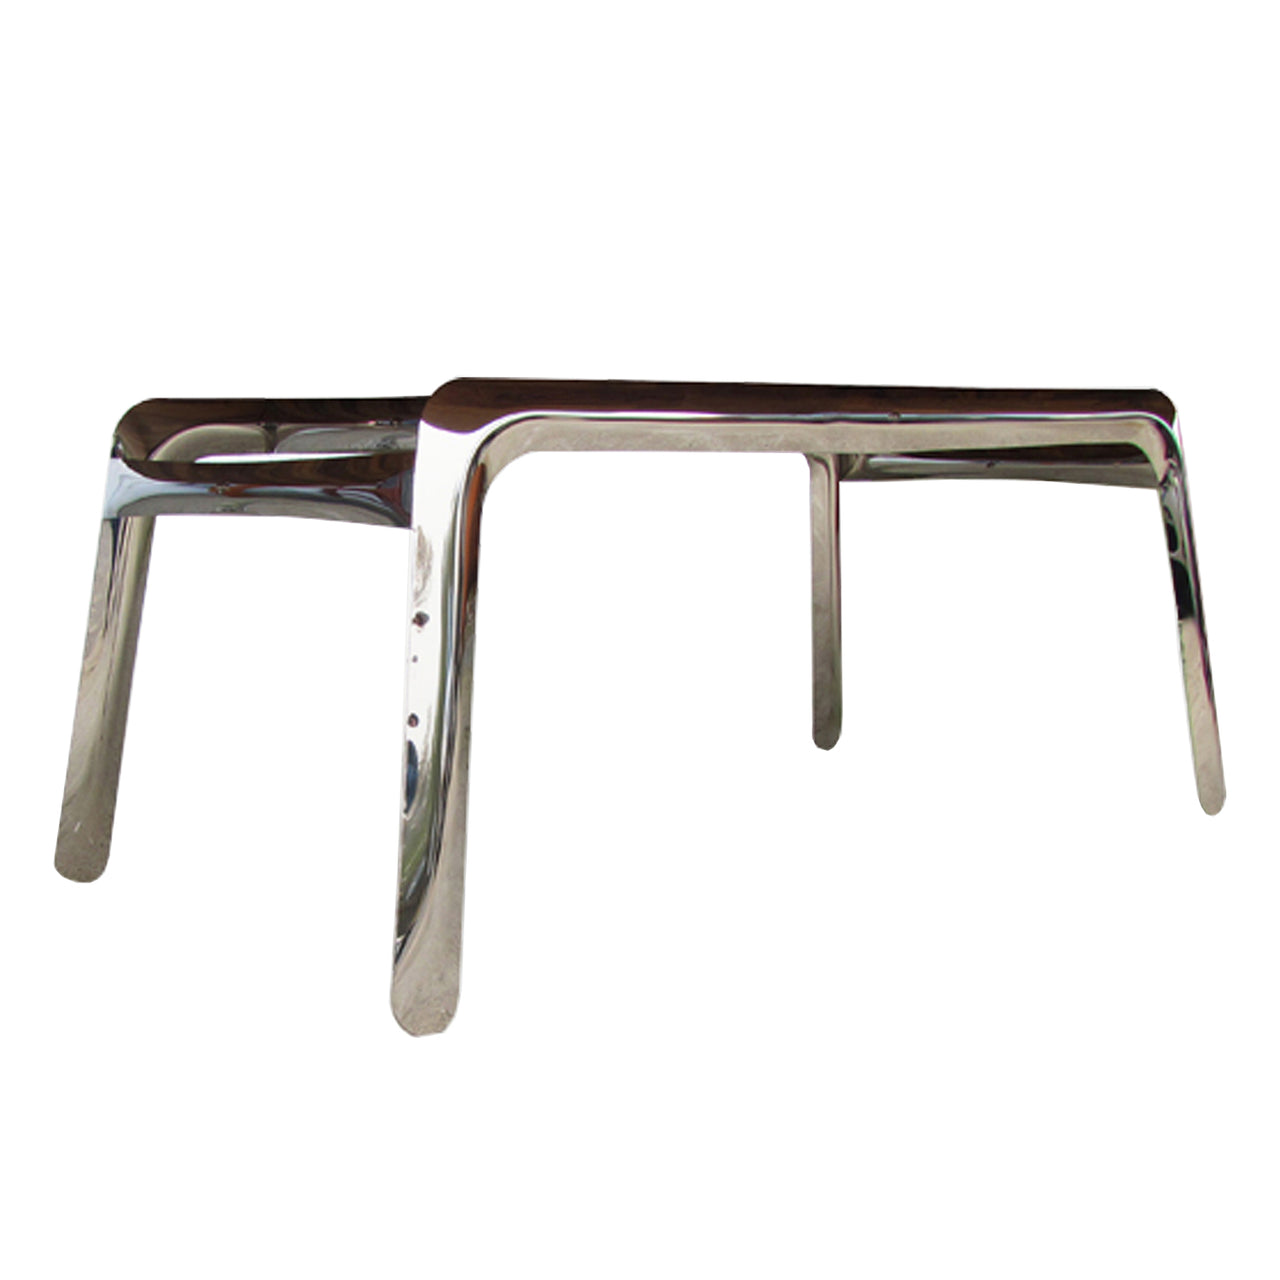 Most Table Base: Inox Polished Stainless Steel